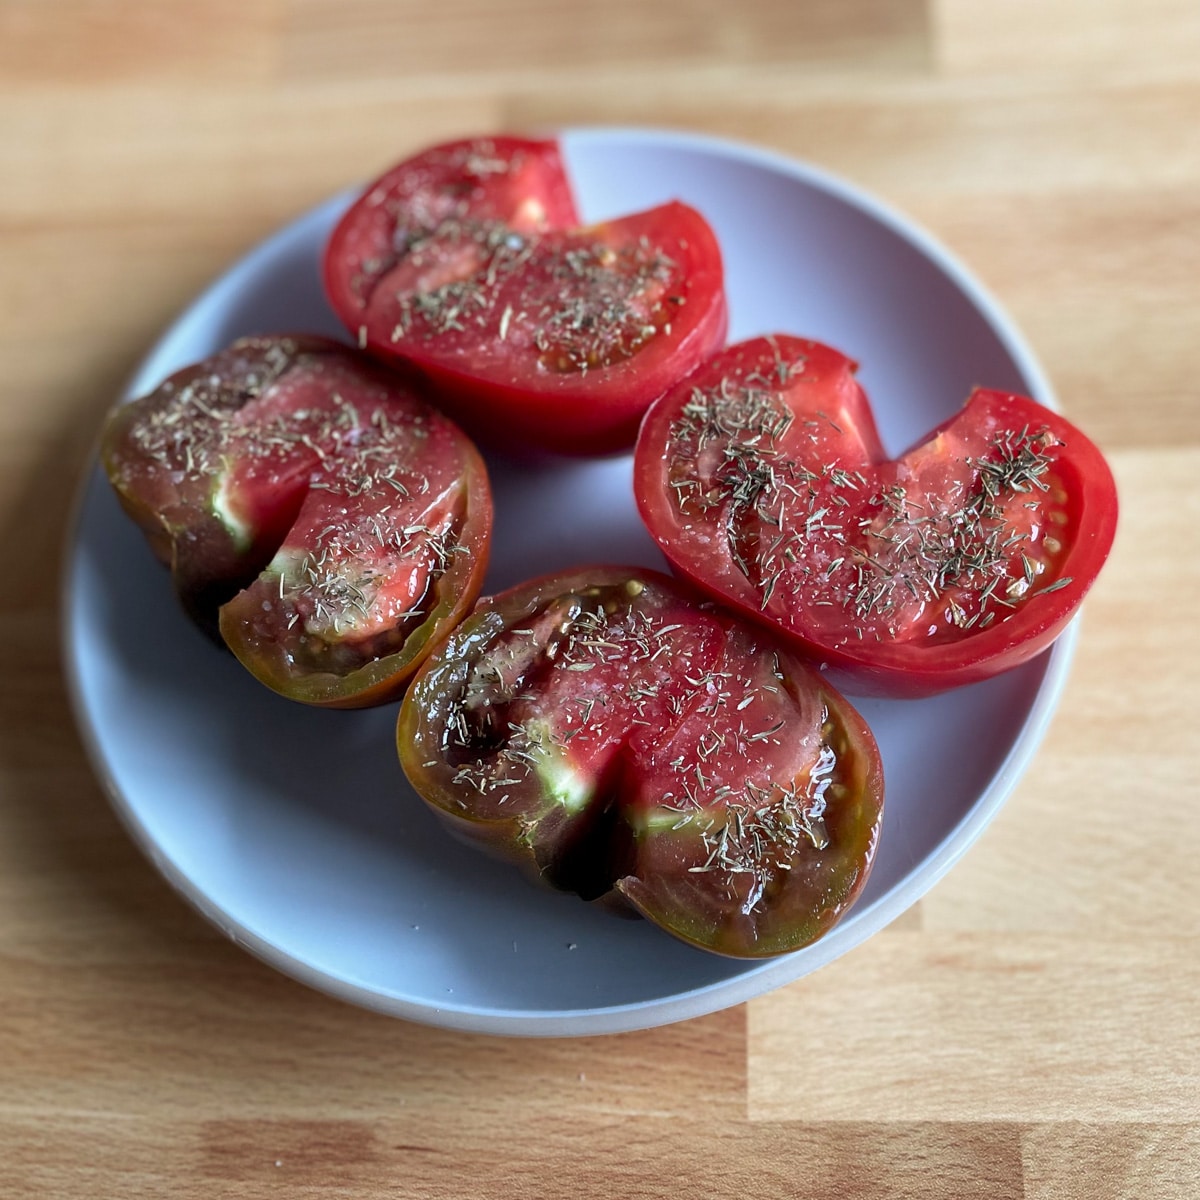 One halved red heirloom tomato and one halved purple and red heirloom tomato dusted with salt and dried thyme sit on a white plate on a butcher block cutting board.